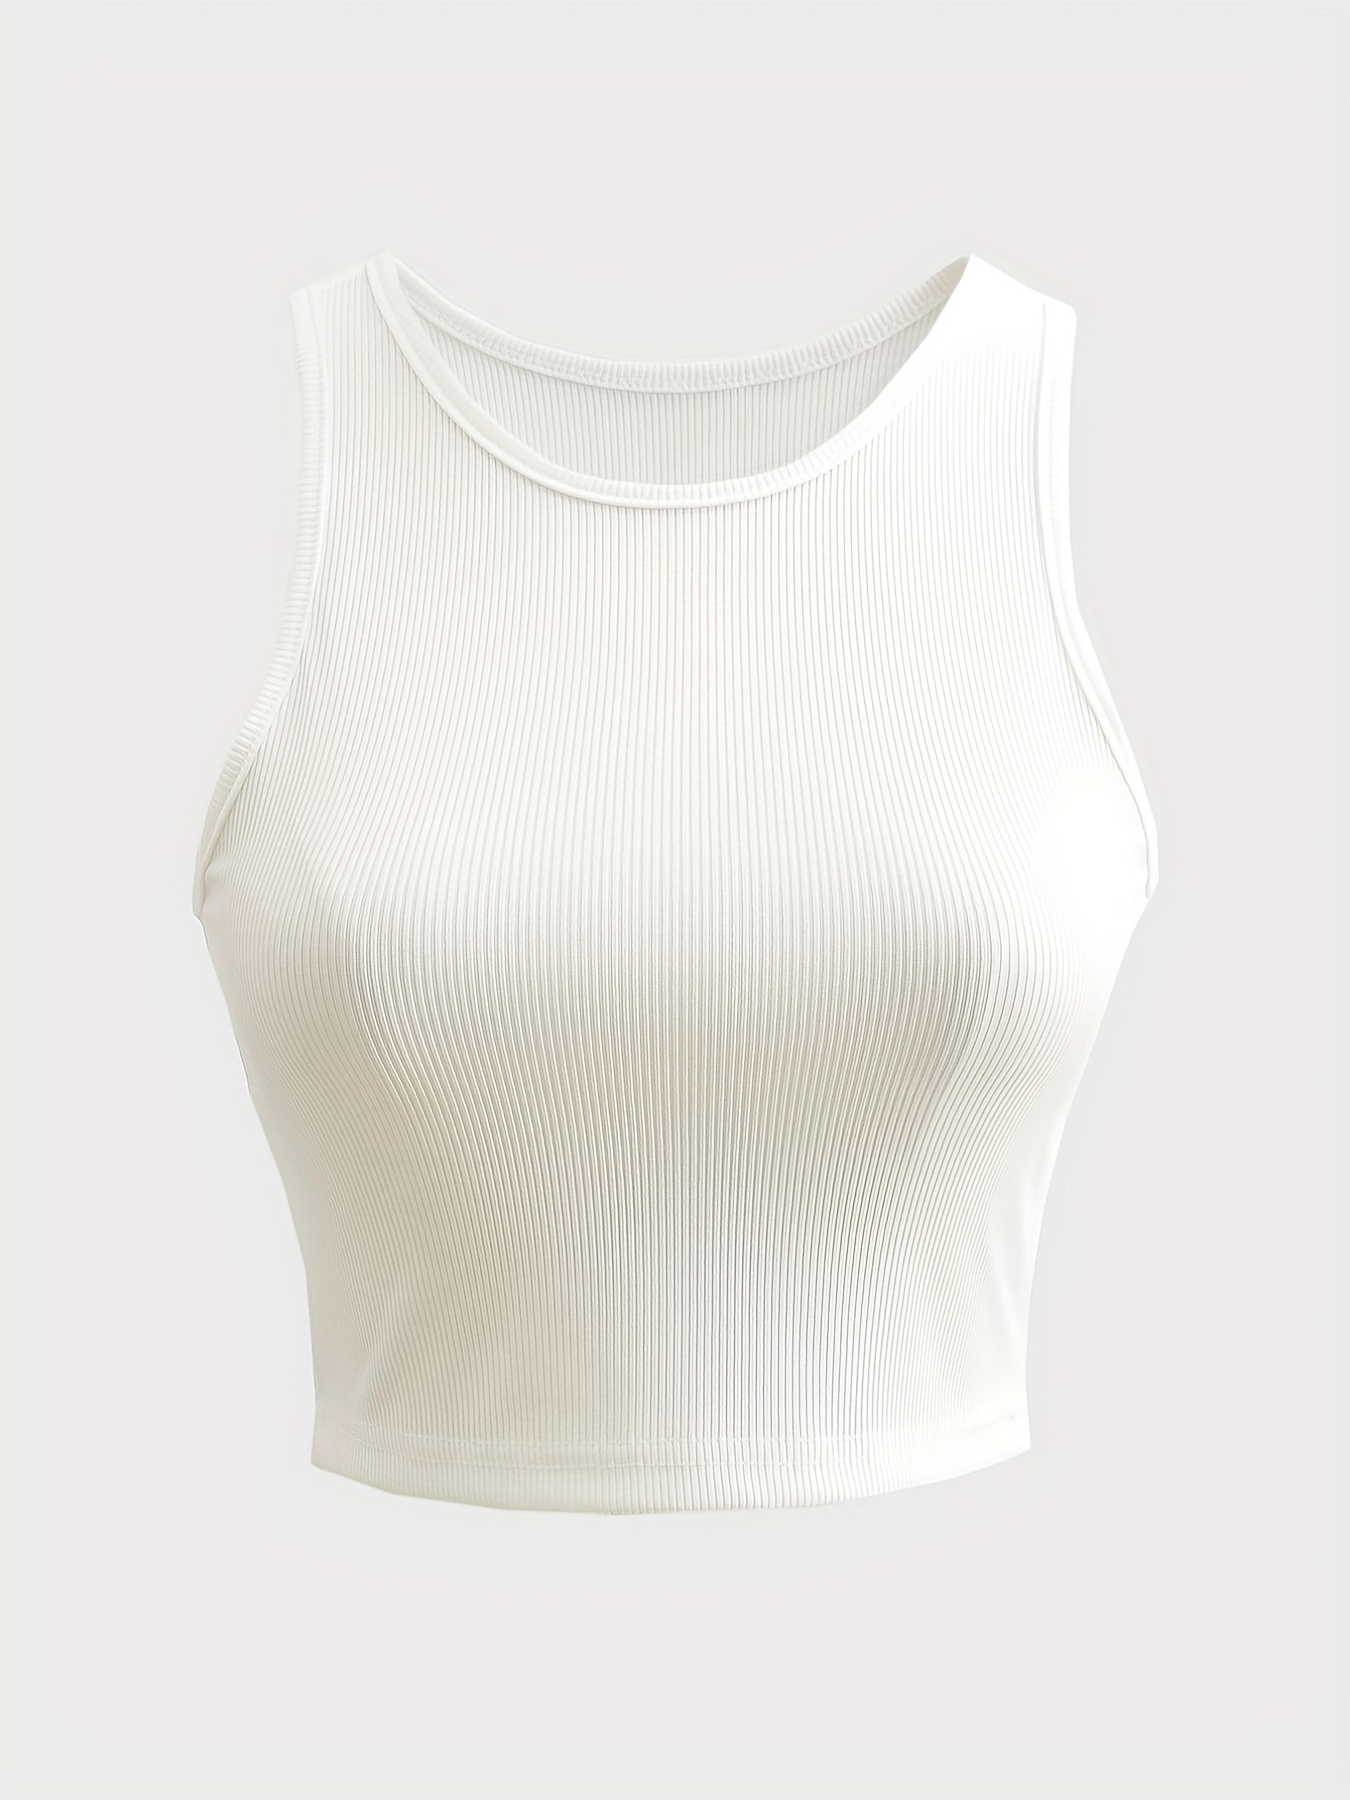 Buy Ketch White Solid Ribbed Sleeveless Tank Crop top for Women Online at  Rs.132 - Ketch